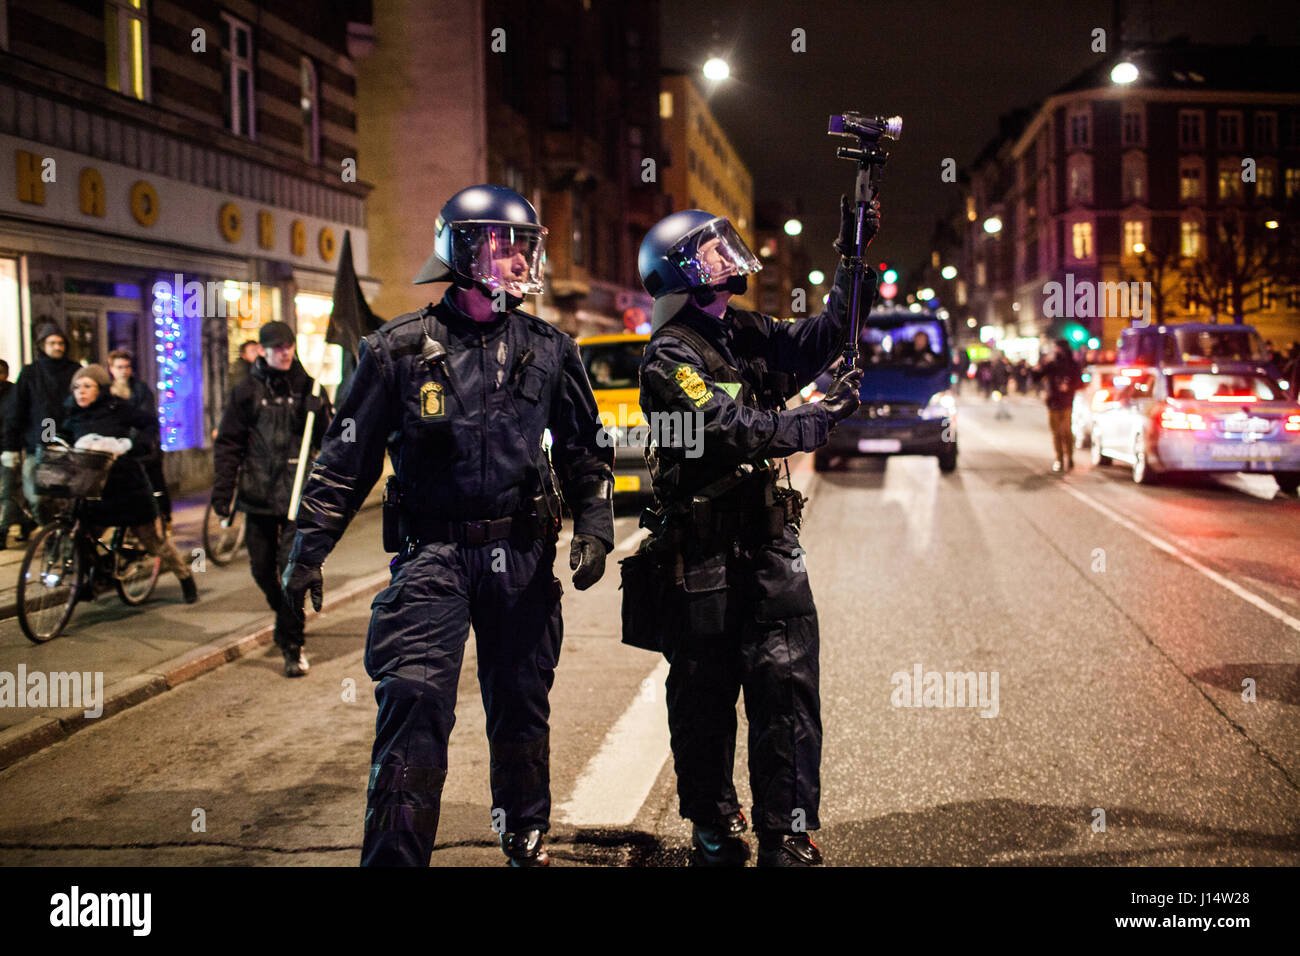 The Danish police was well prepared and showed up with many officers. Here two police officers with helmets are video recording the demonstrators. Den Stock Photo